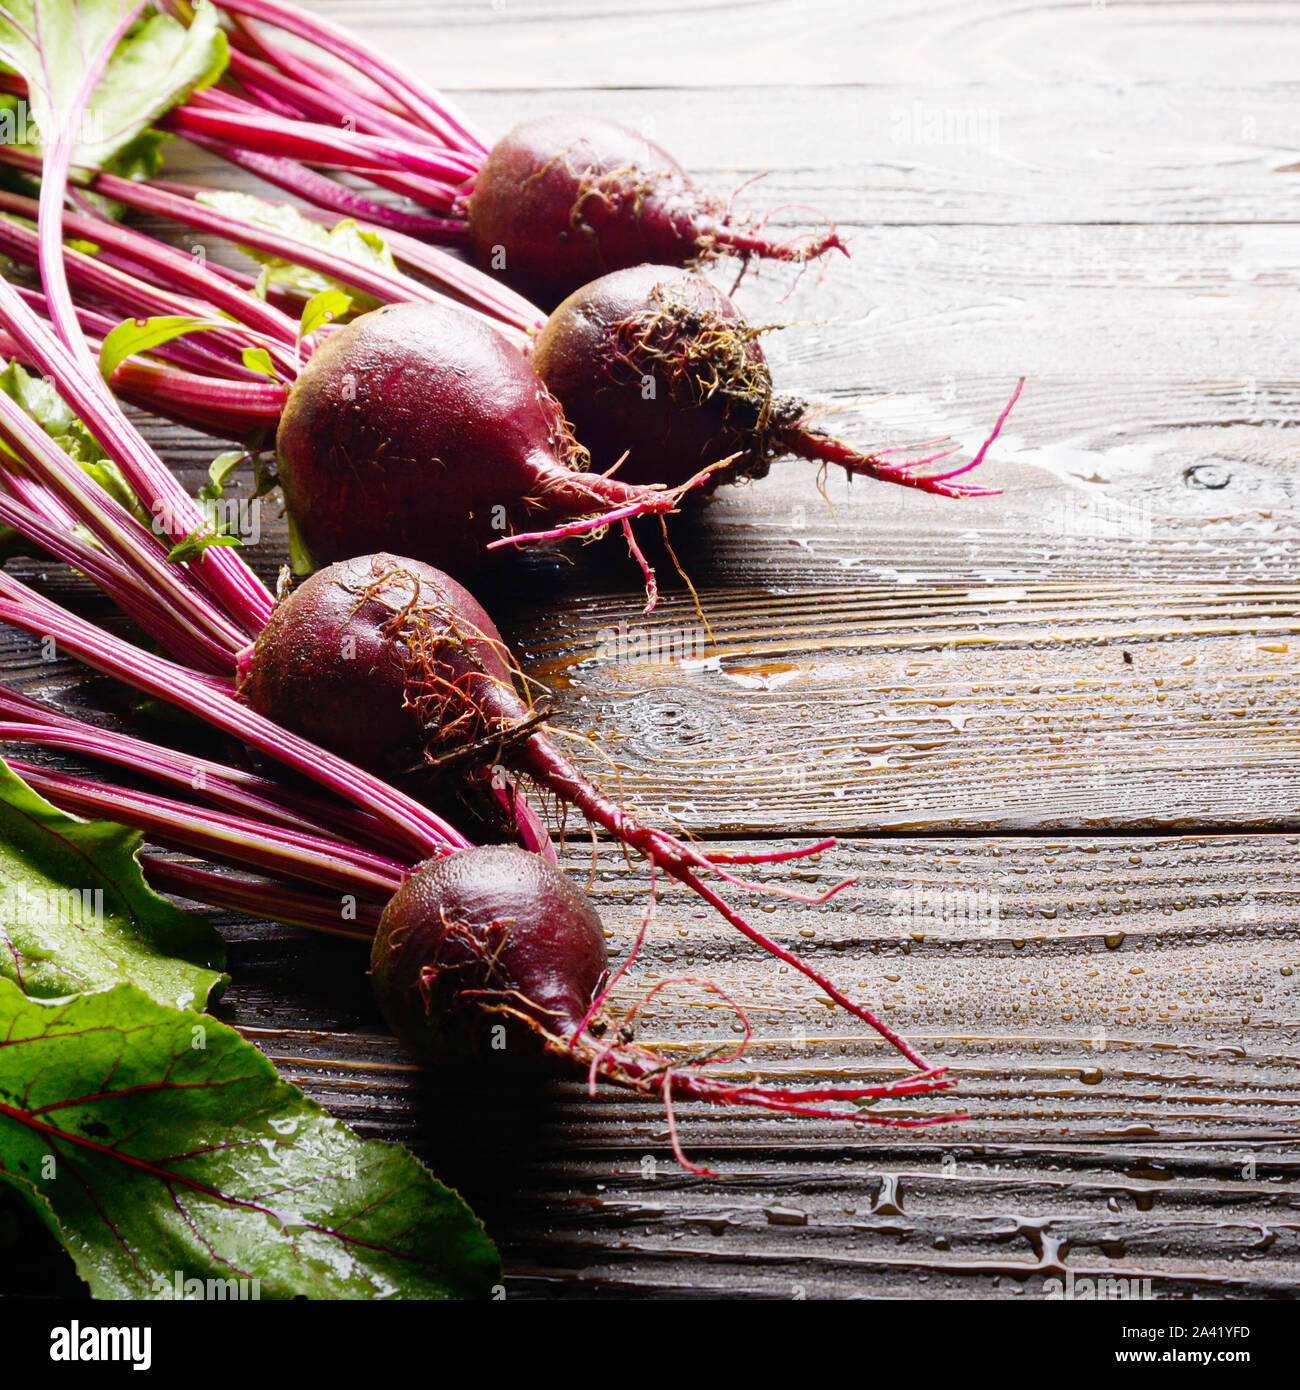 Fresh organic beetroots on kitchen wooden rustic table close up view Stock Photo